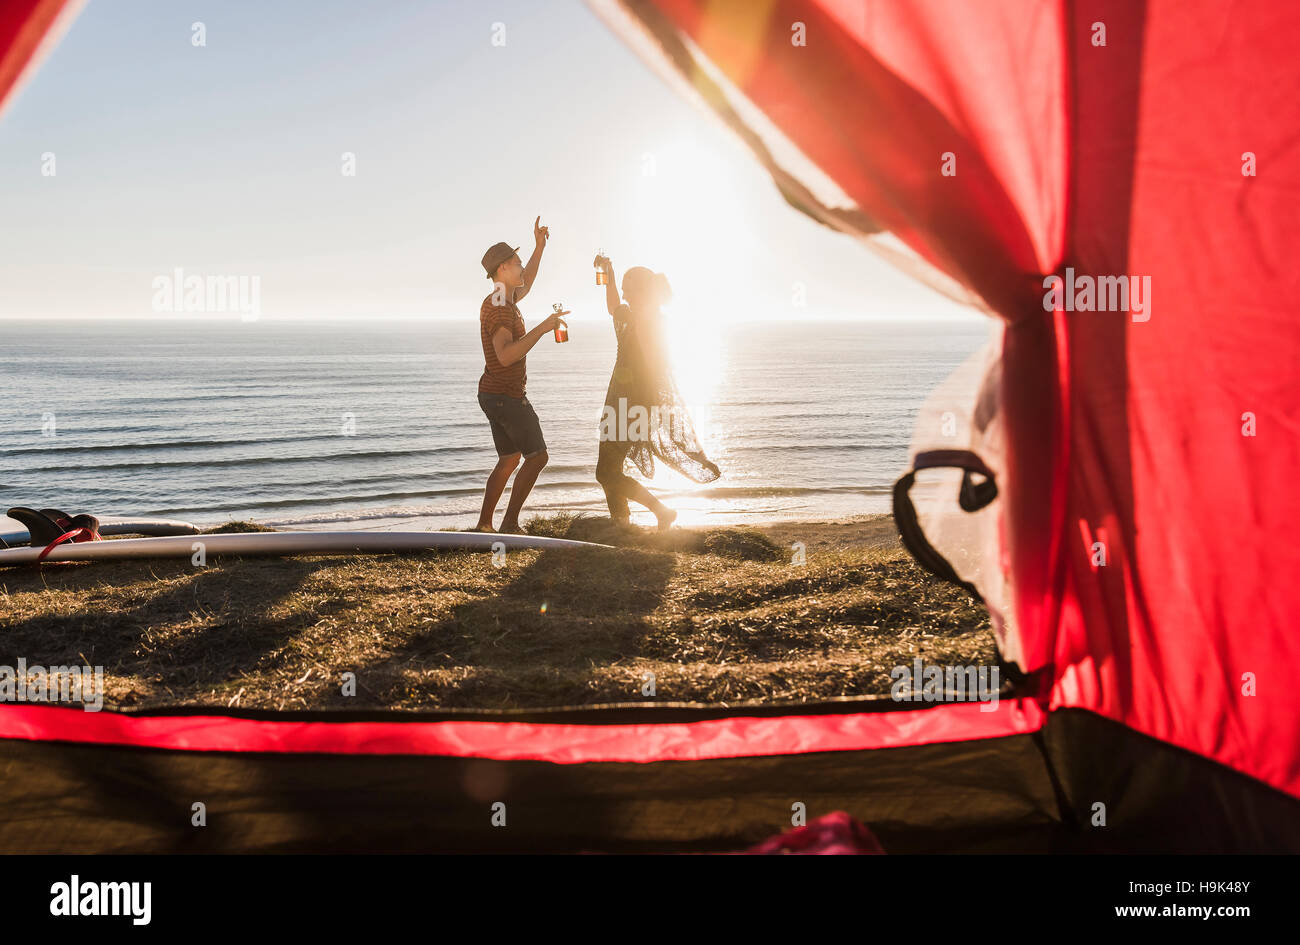 Dancing young couple camping at seaside Stock Photo